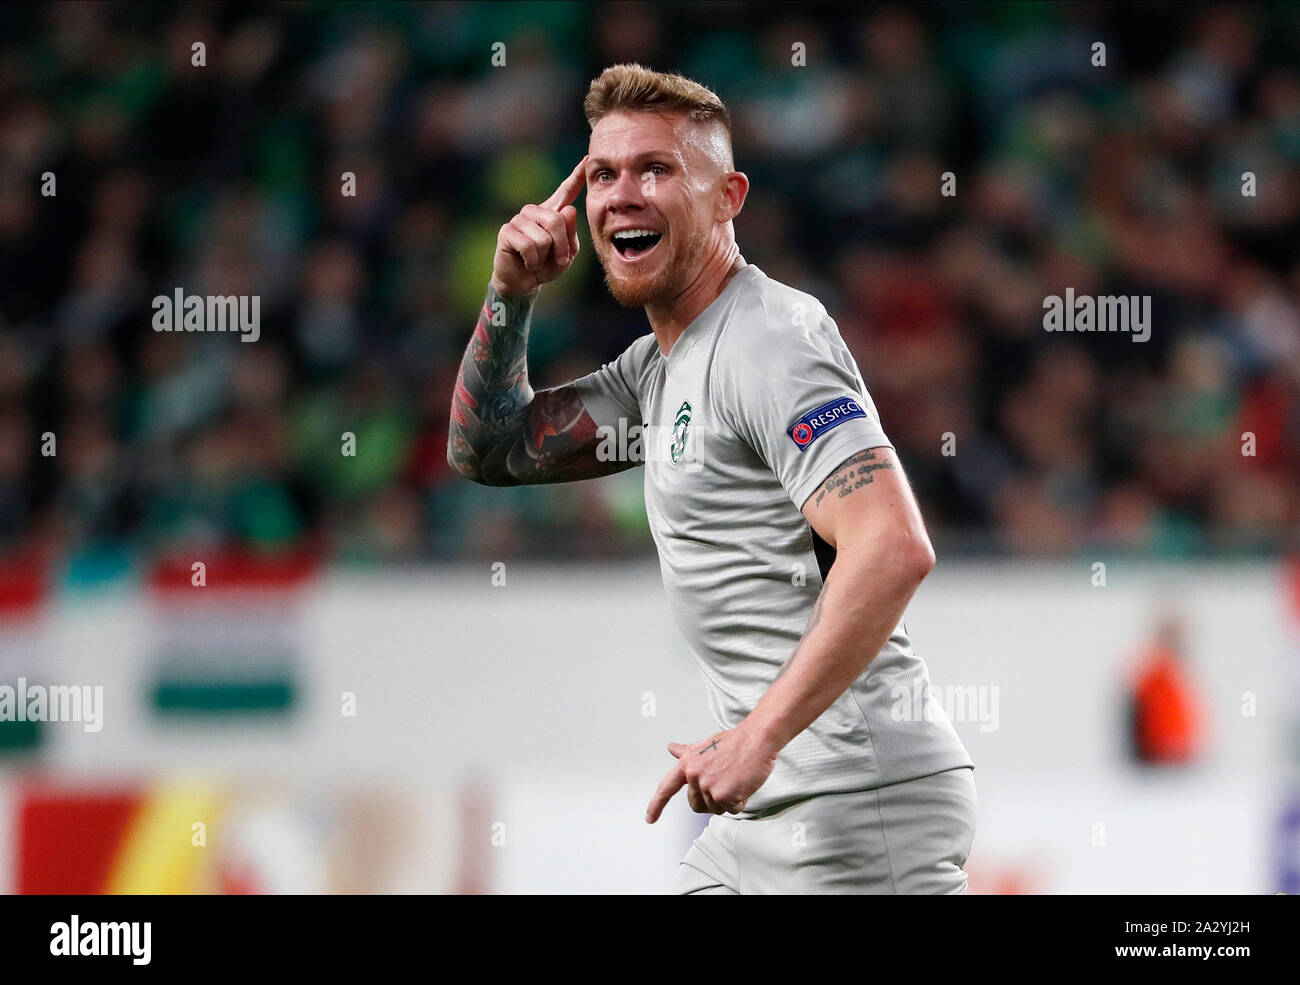 BUDAPEST, HUNGARY - OCTOBER 3: Rafael Forster of PFC Ludogorets 1945 celebrates his goal during the UEFA Europa League Group Stage match between Ferencvarosi TC and PFC Ludogorets 1945 at Ferencvaros Stadium on October 3, 2019 in Budapest, Hungary. Stock Photo